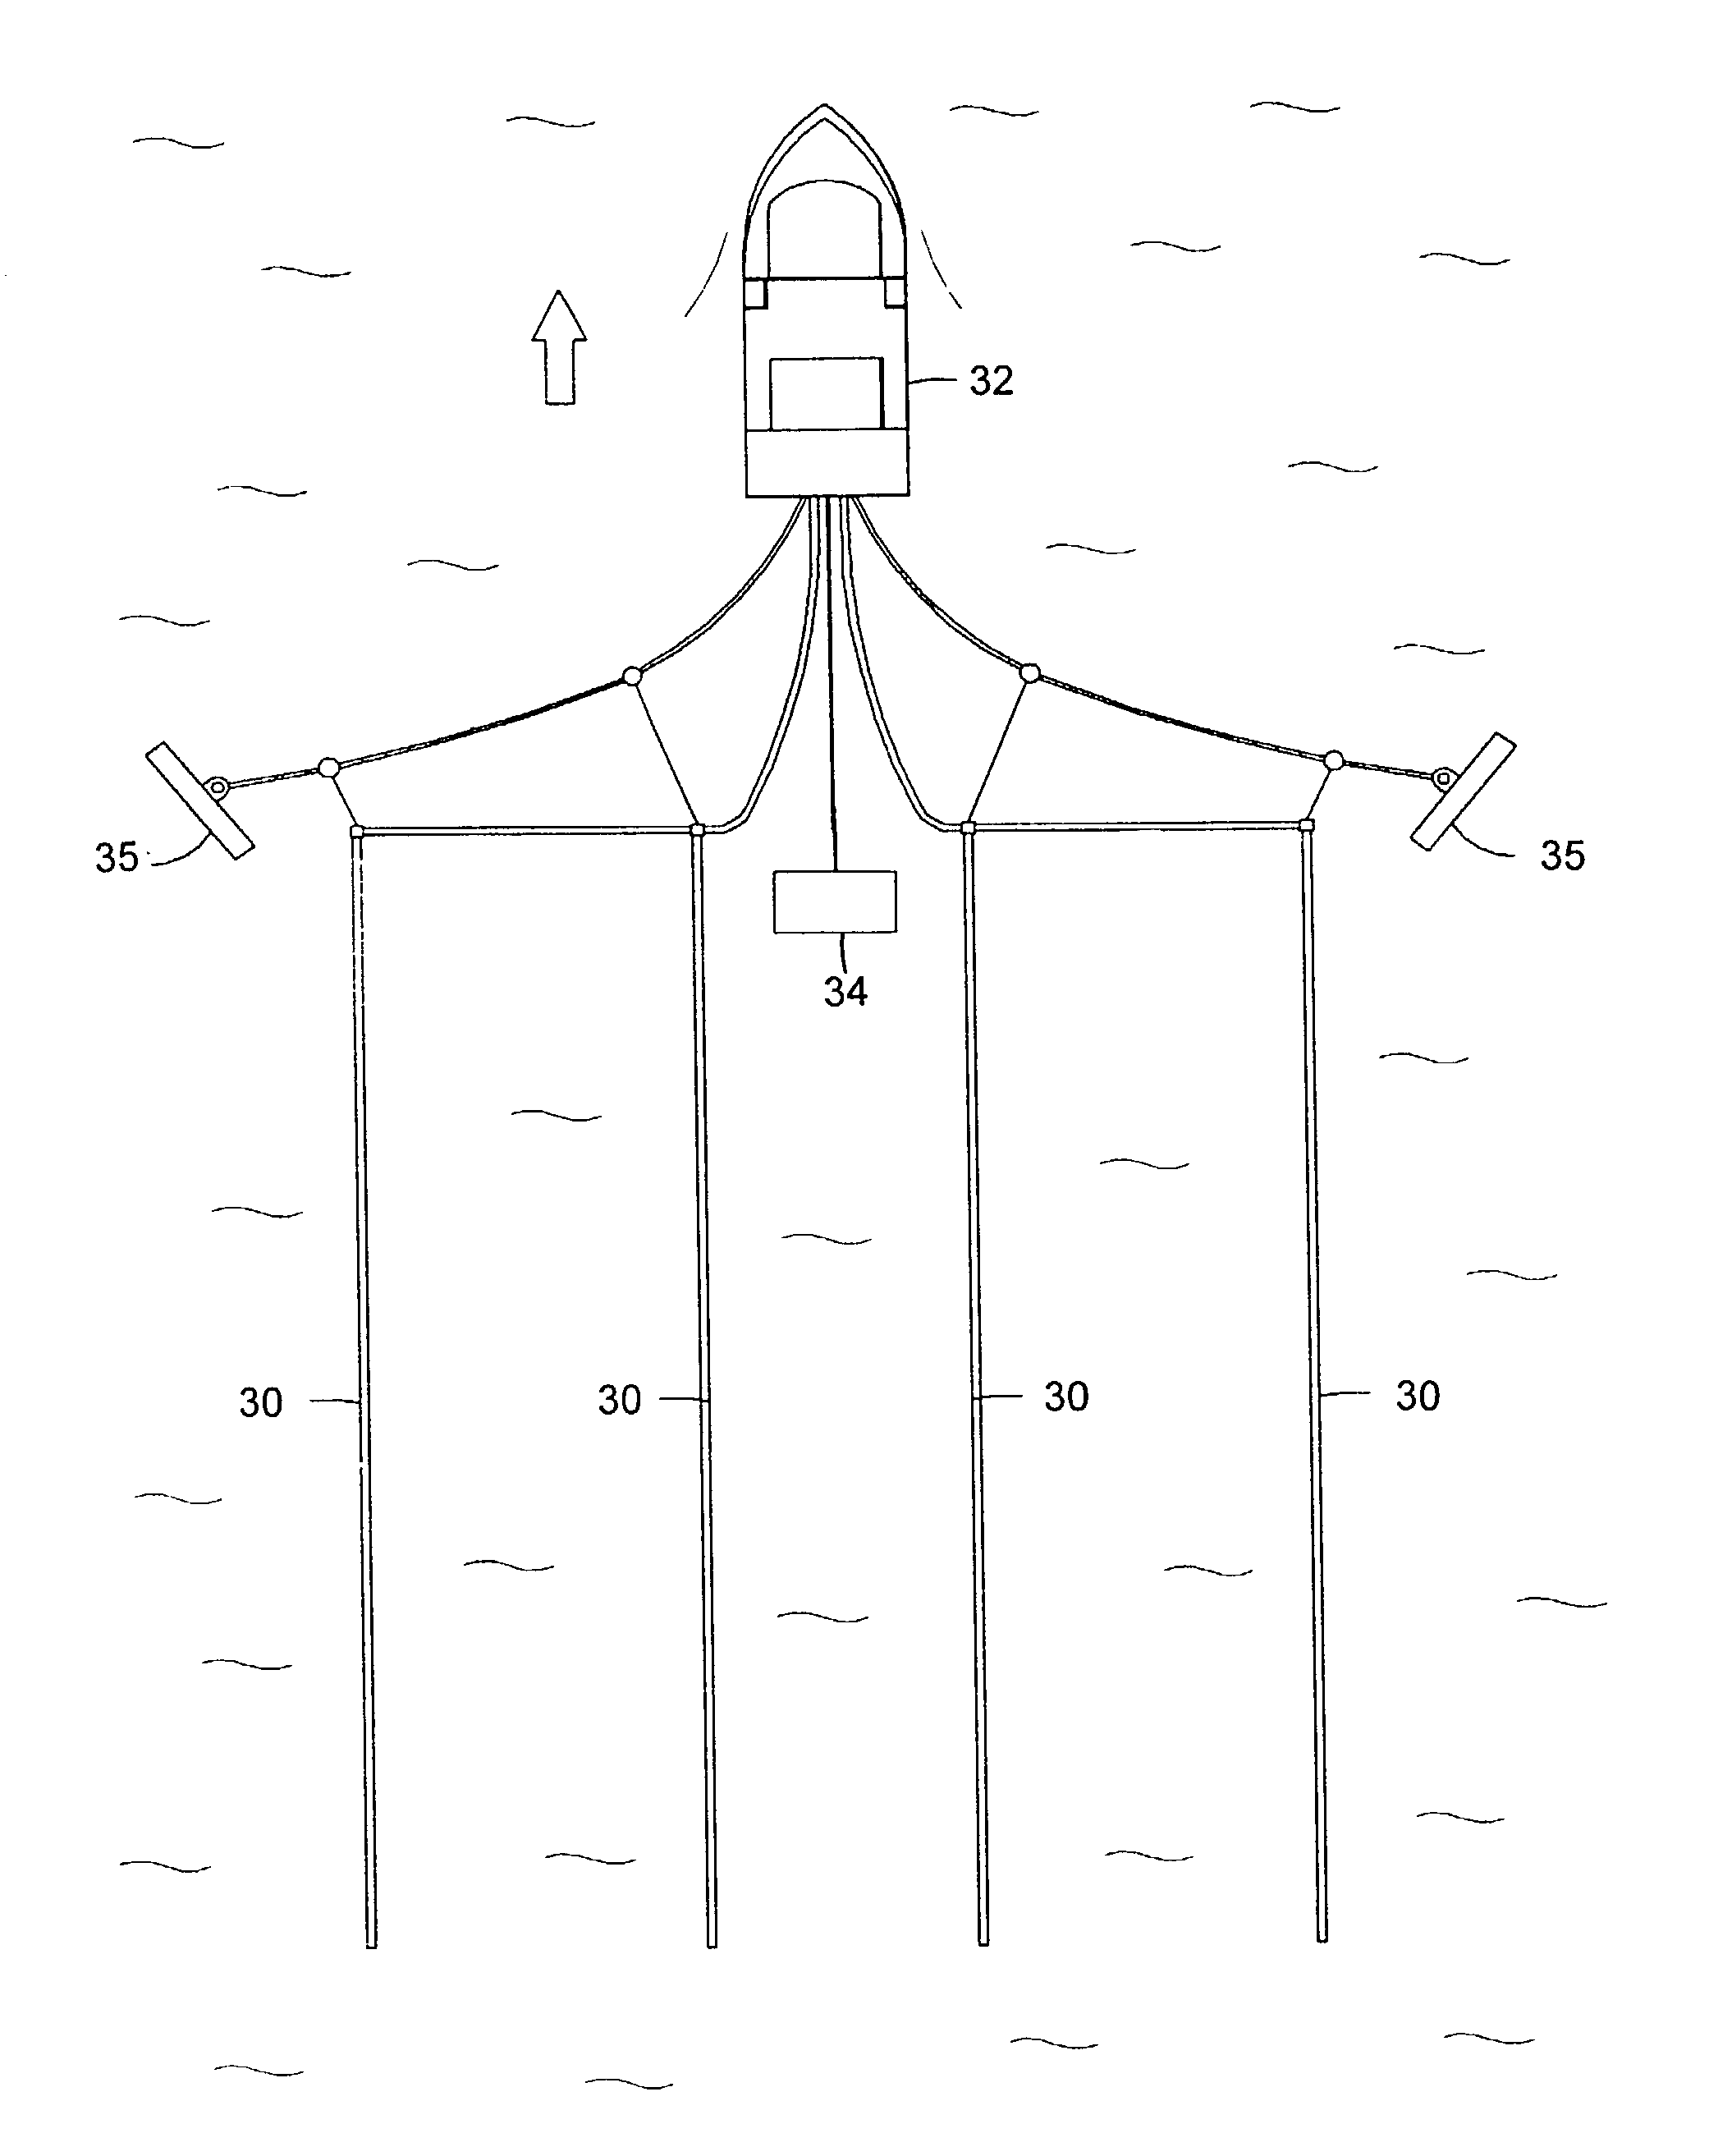 Apparatus and methods for multicomponent marine geophysical data gathering